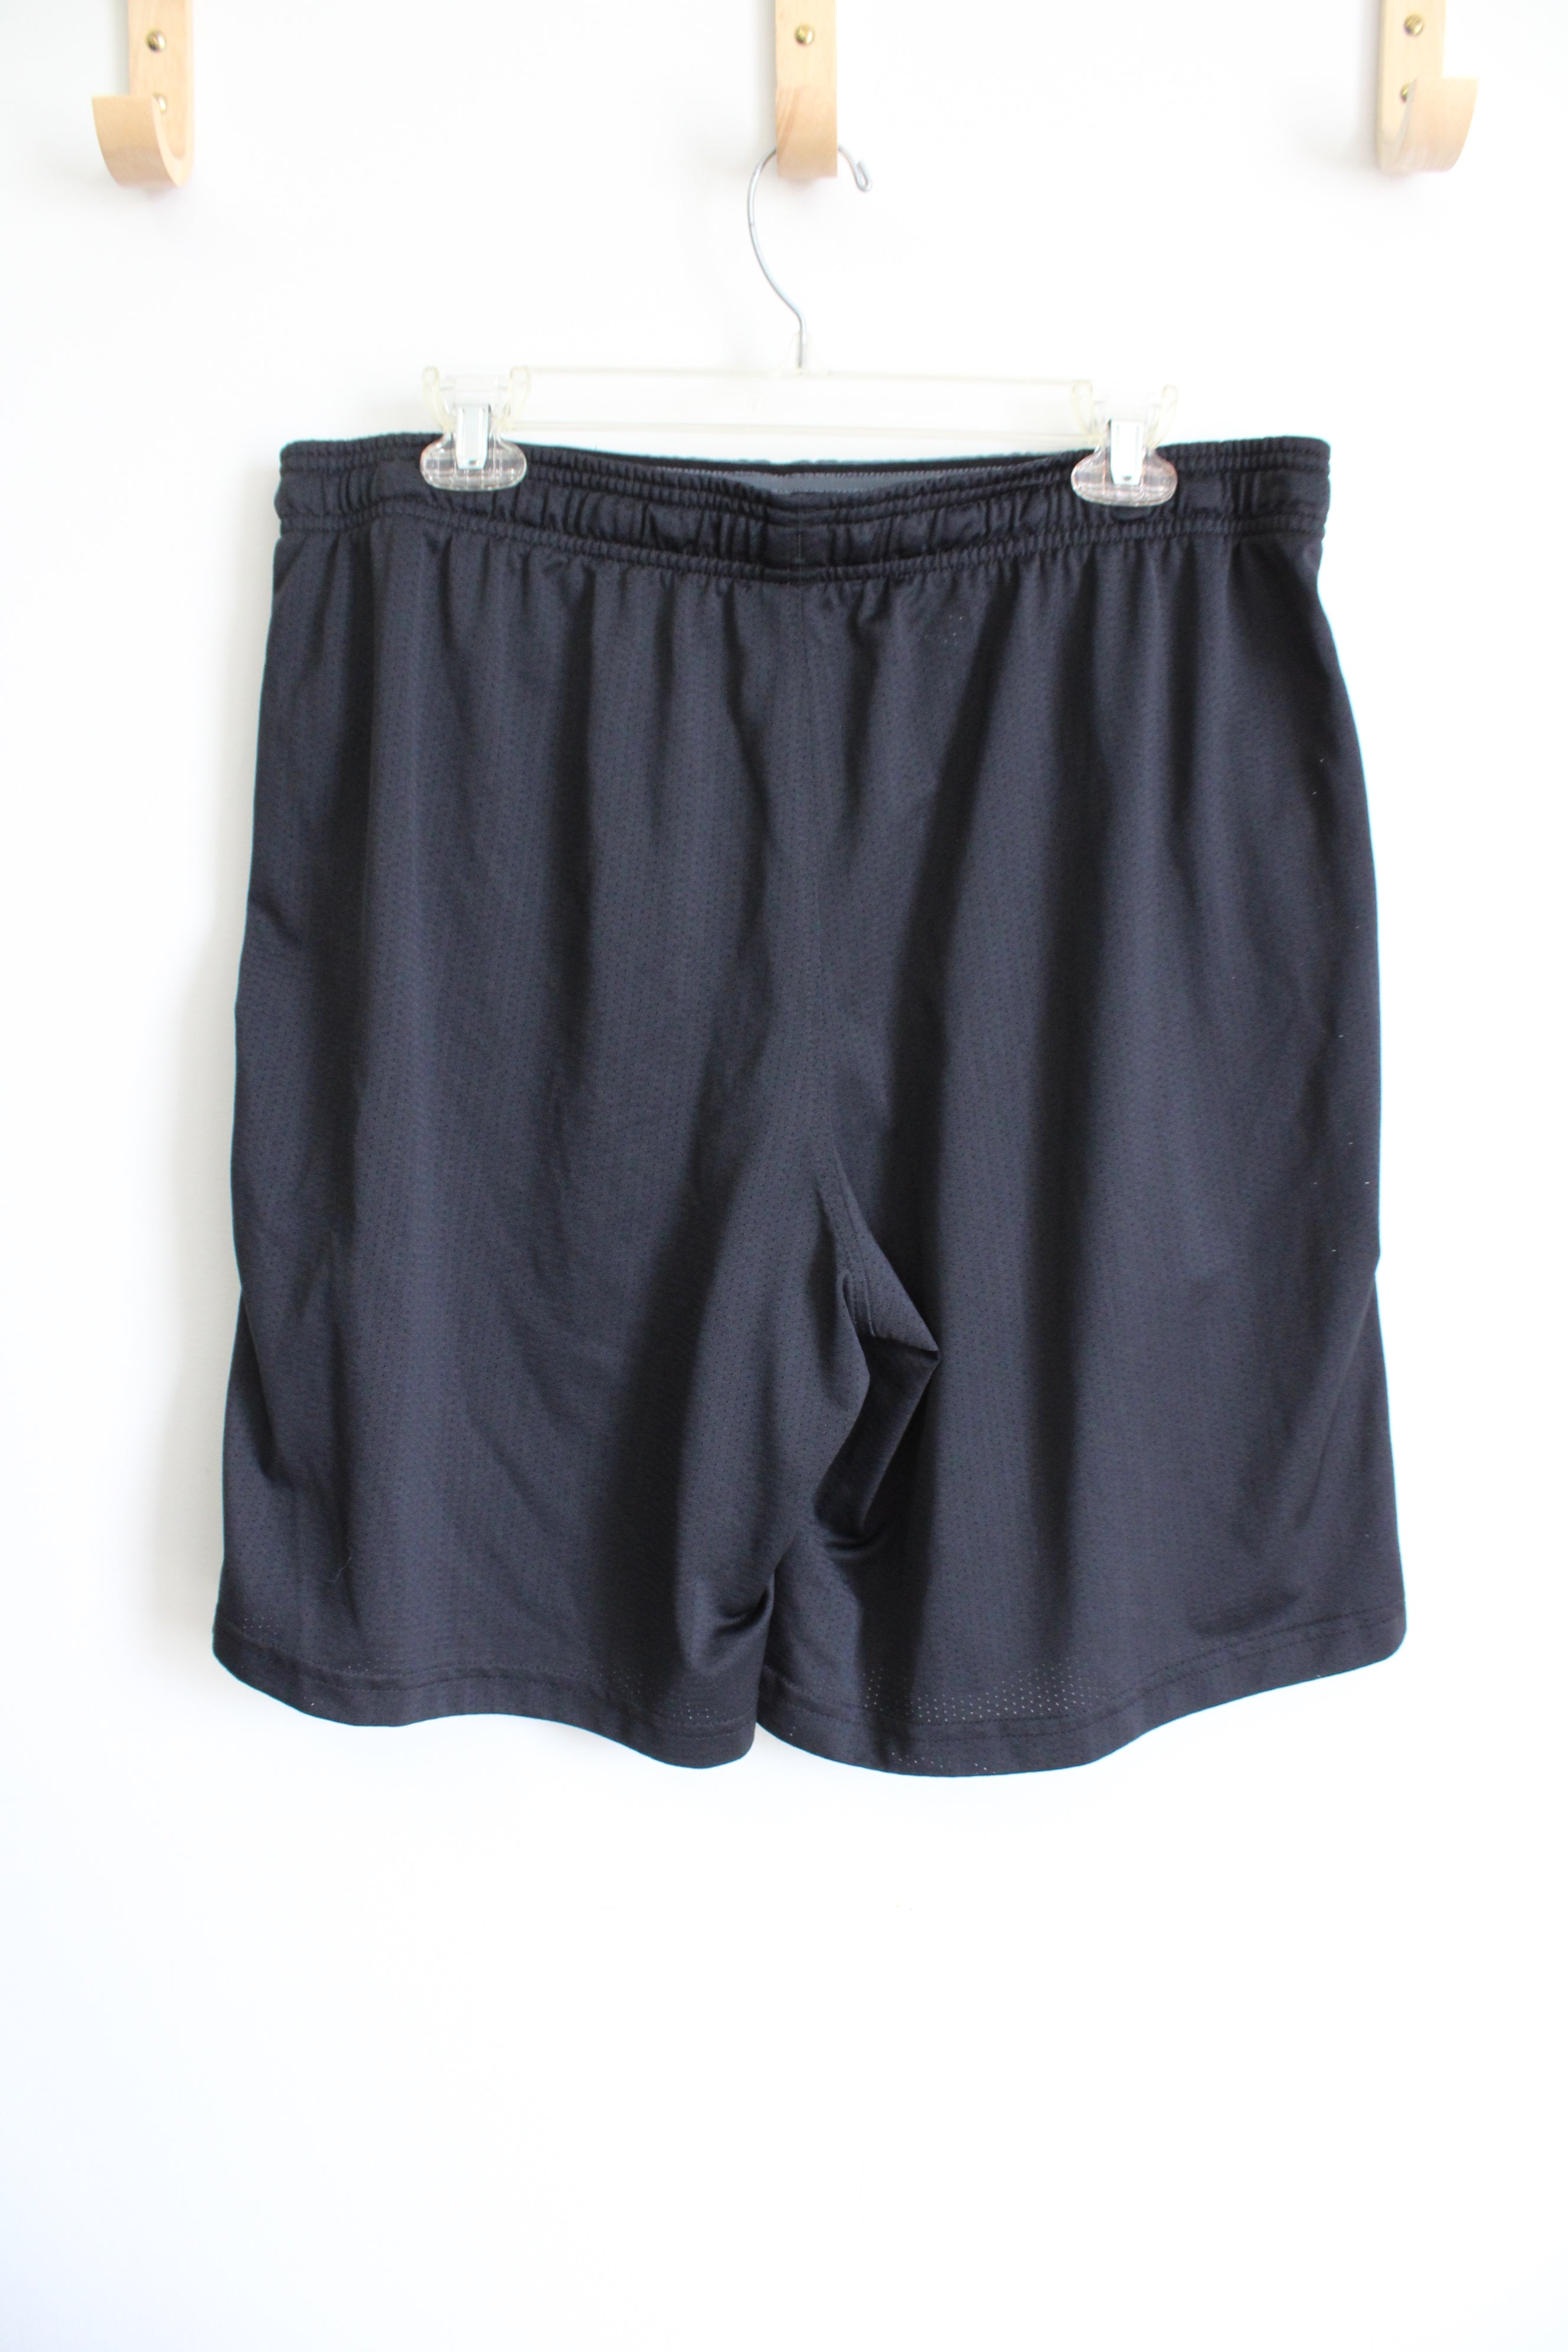 Under Armour Loose Black Athletic Shorts | XL